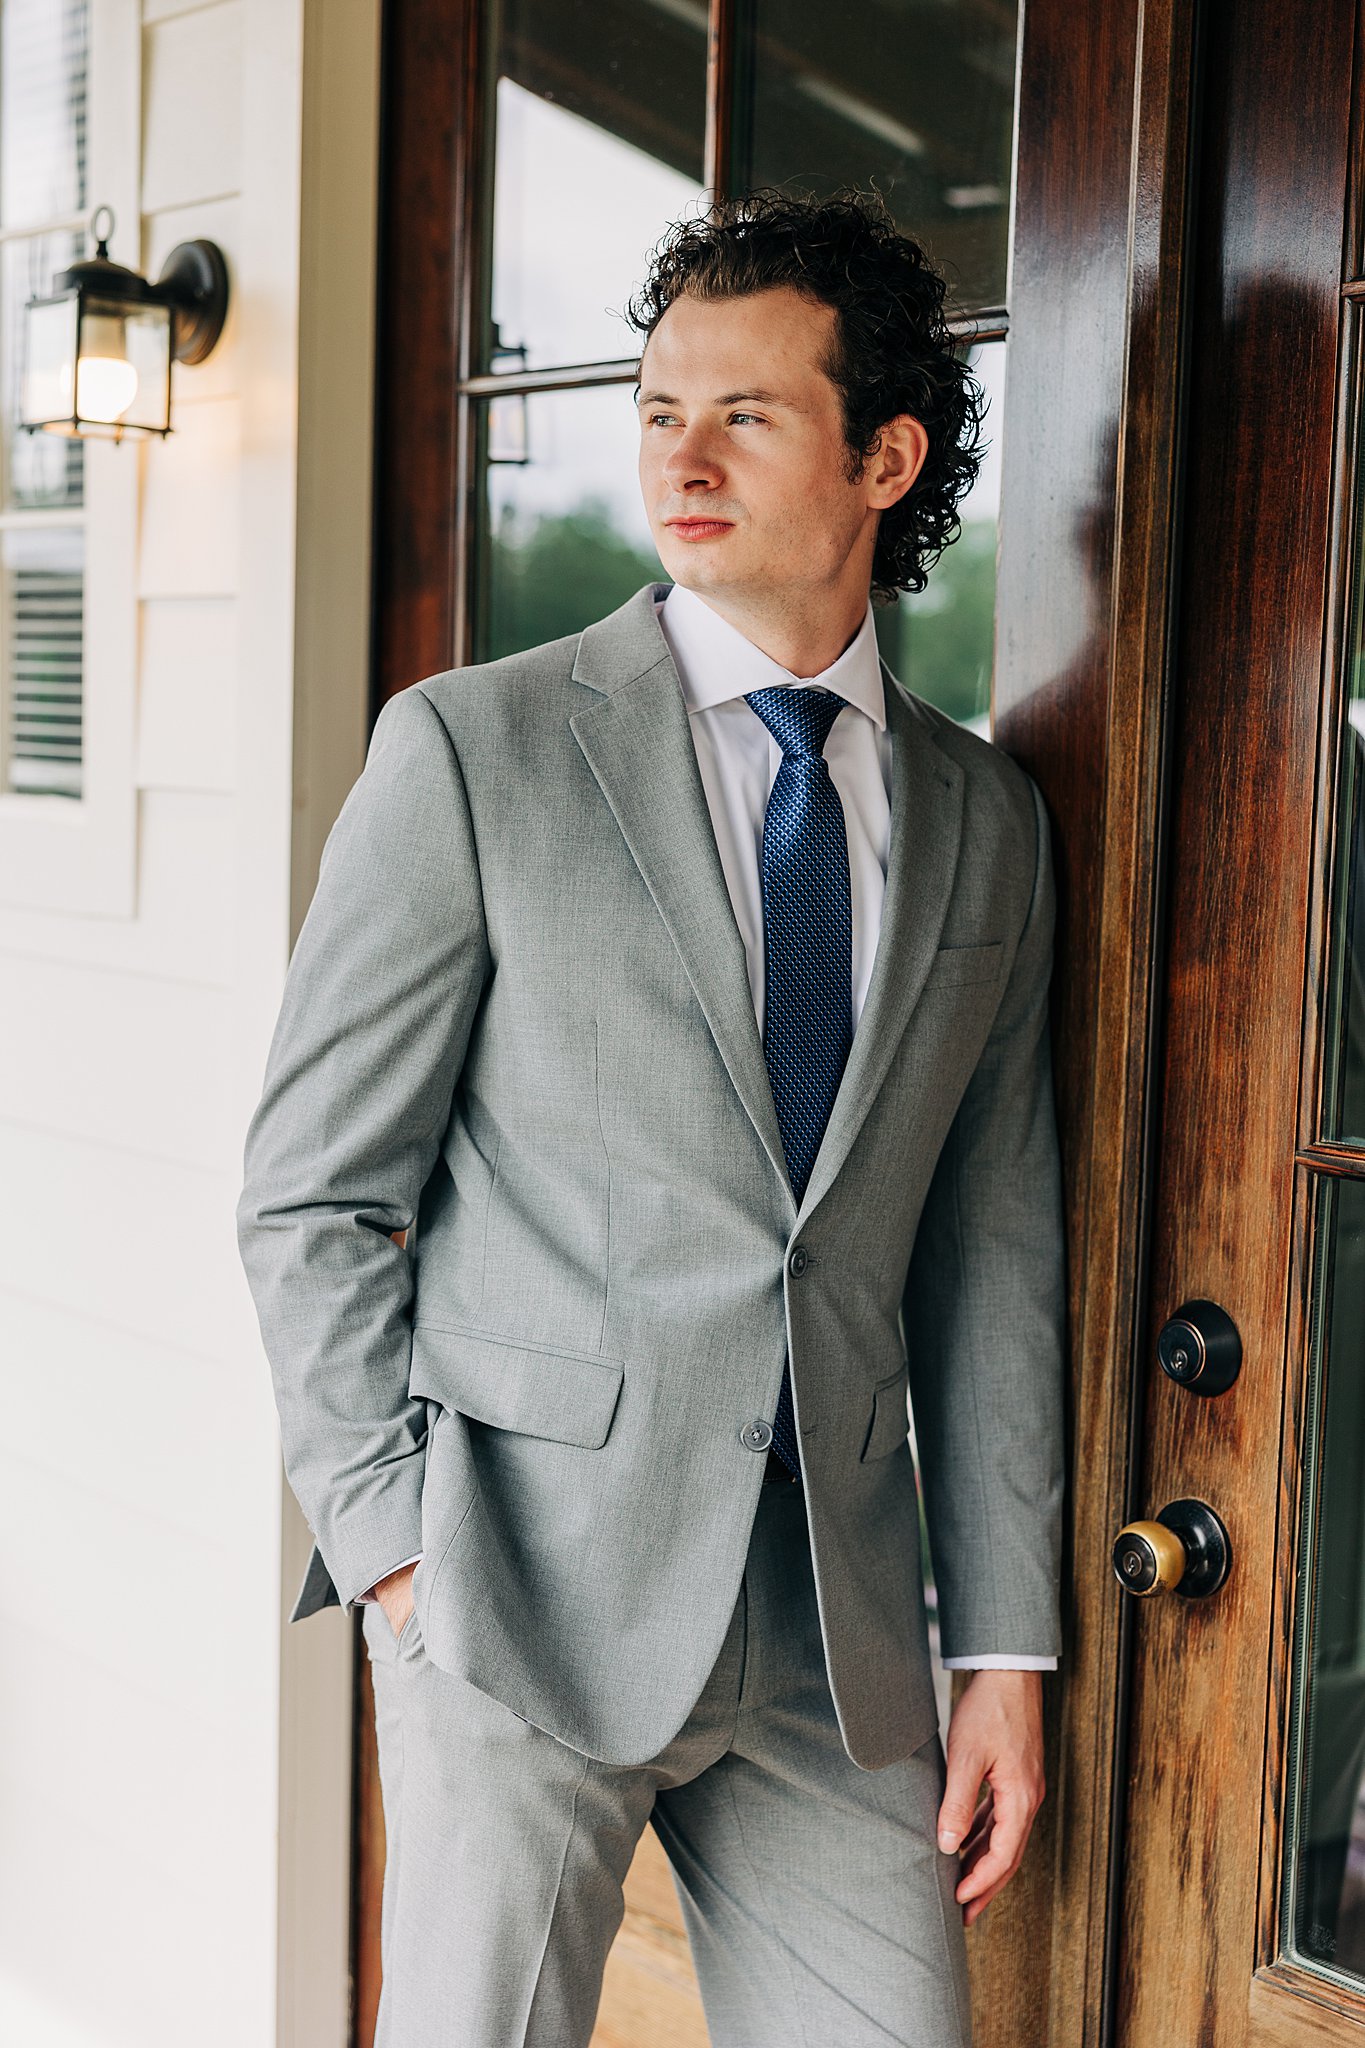 A groom in a grey suit leans against a wooden door on a porch